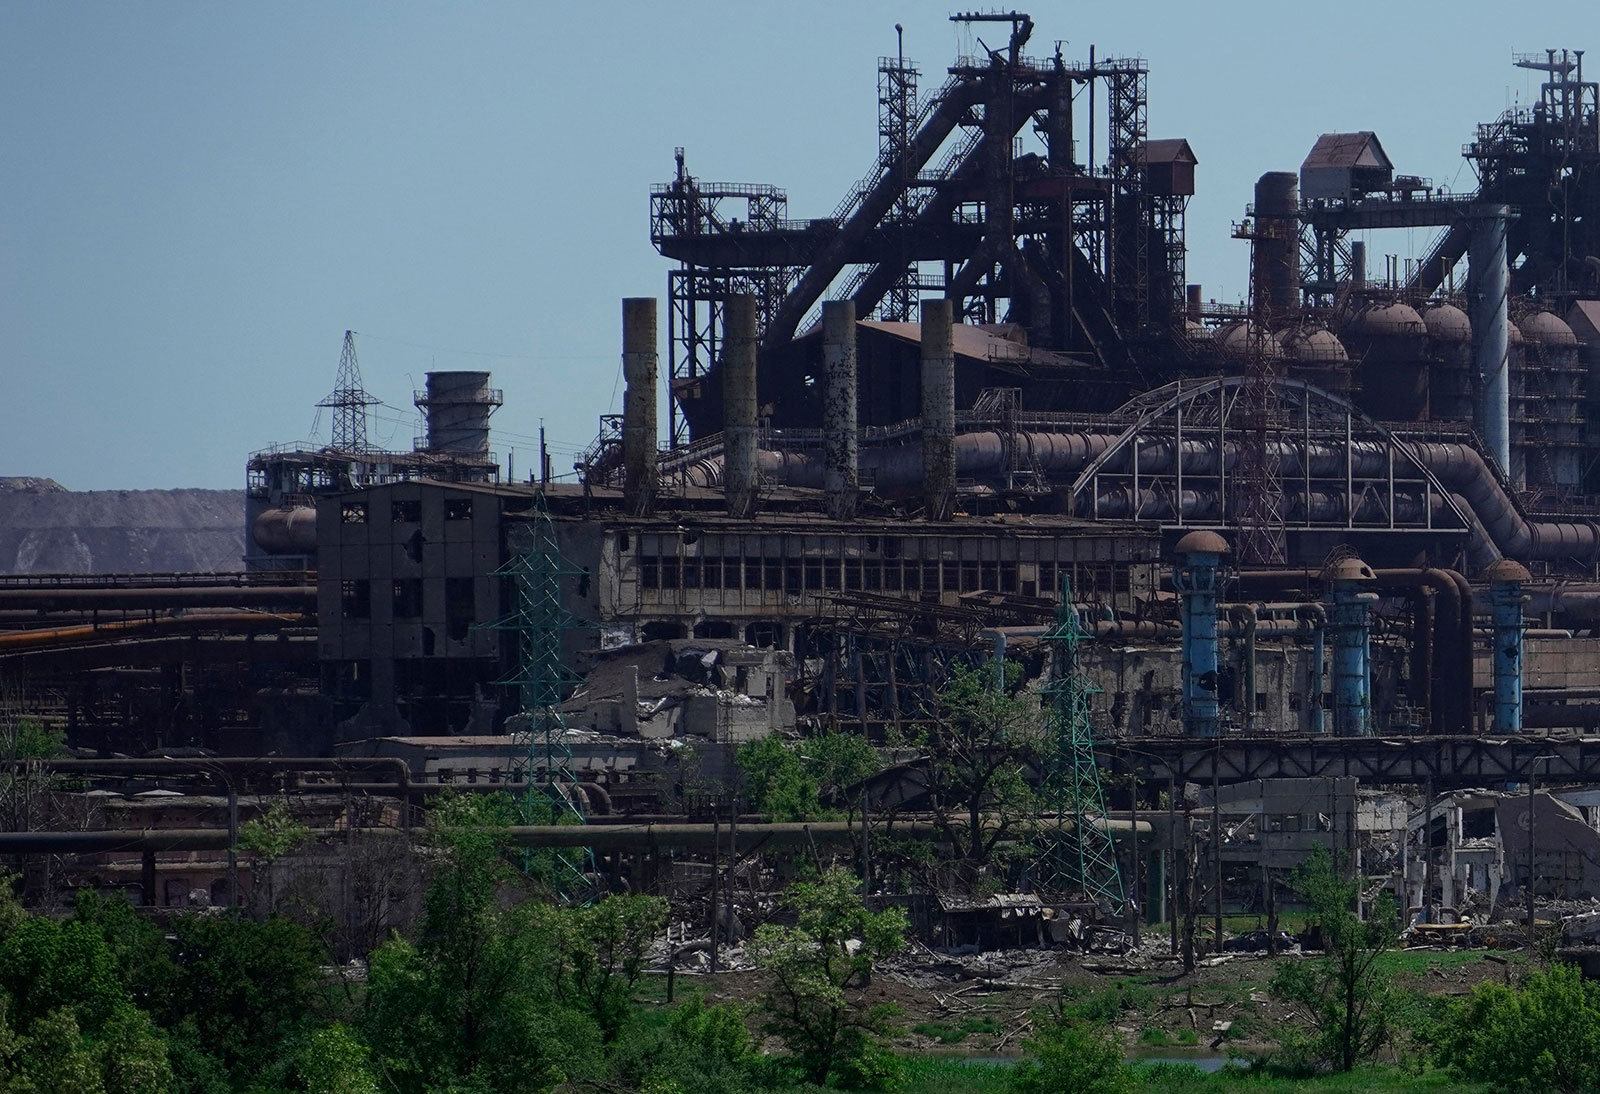 Zelensky: More than 2,500 prisoners from Mariupol's Azovstal plant may be held in Donetsk and Luhansk regions